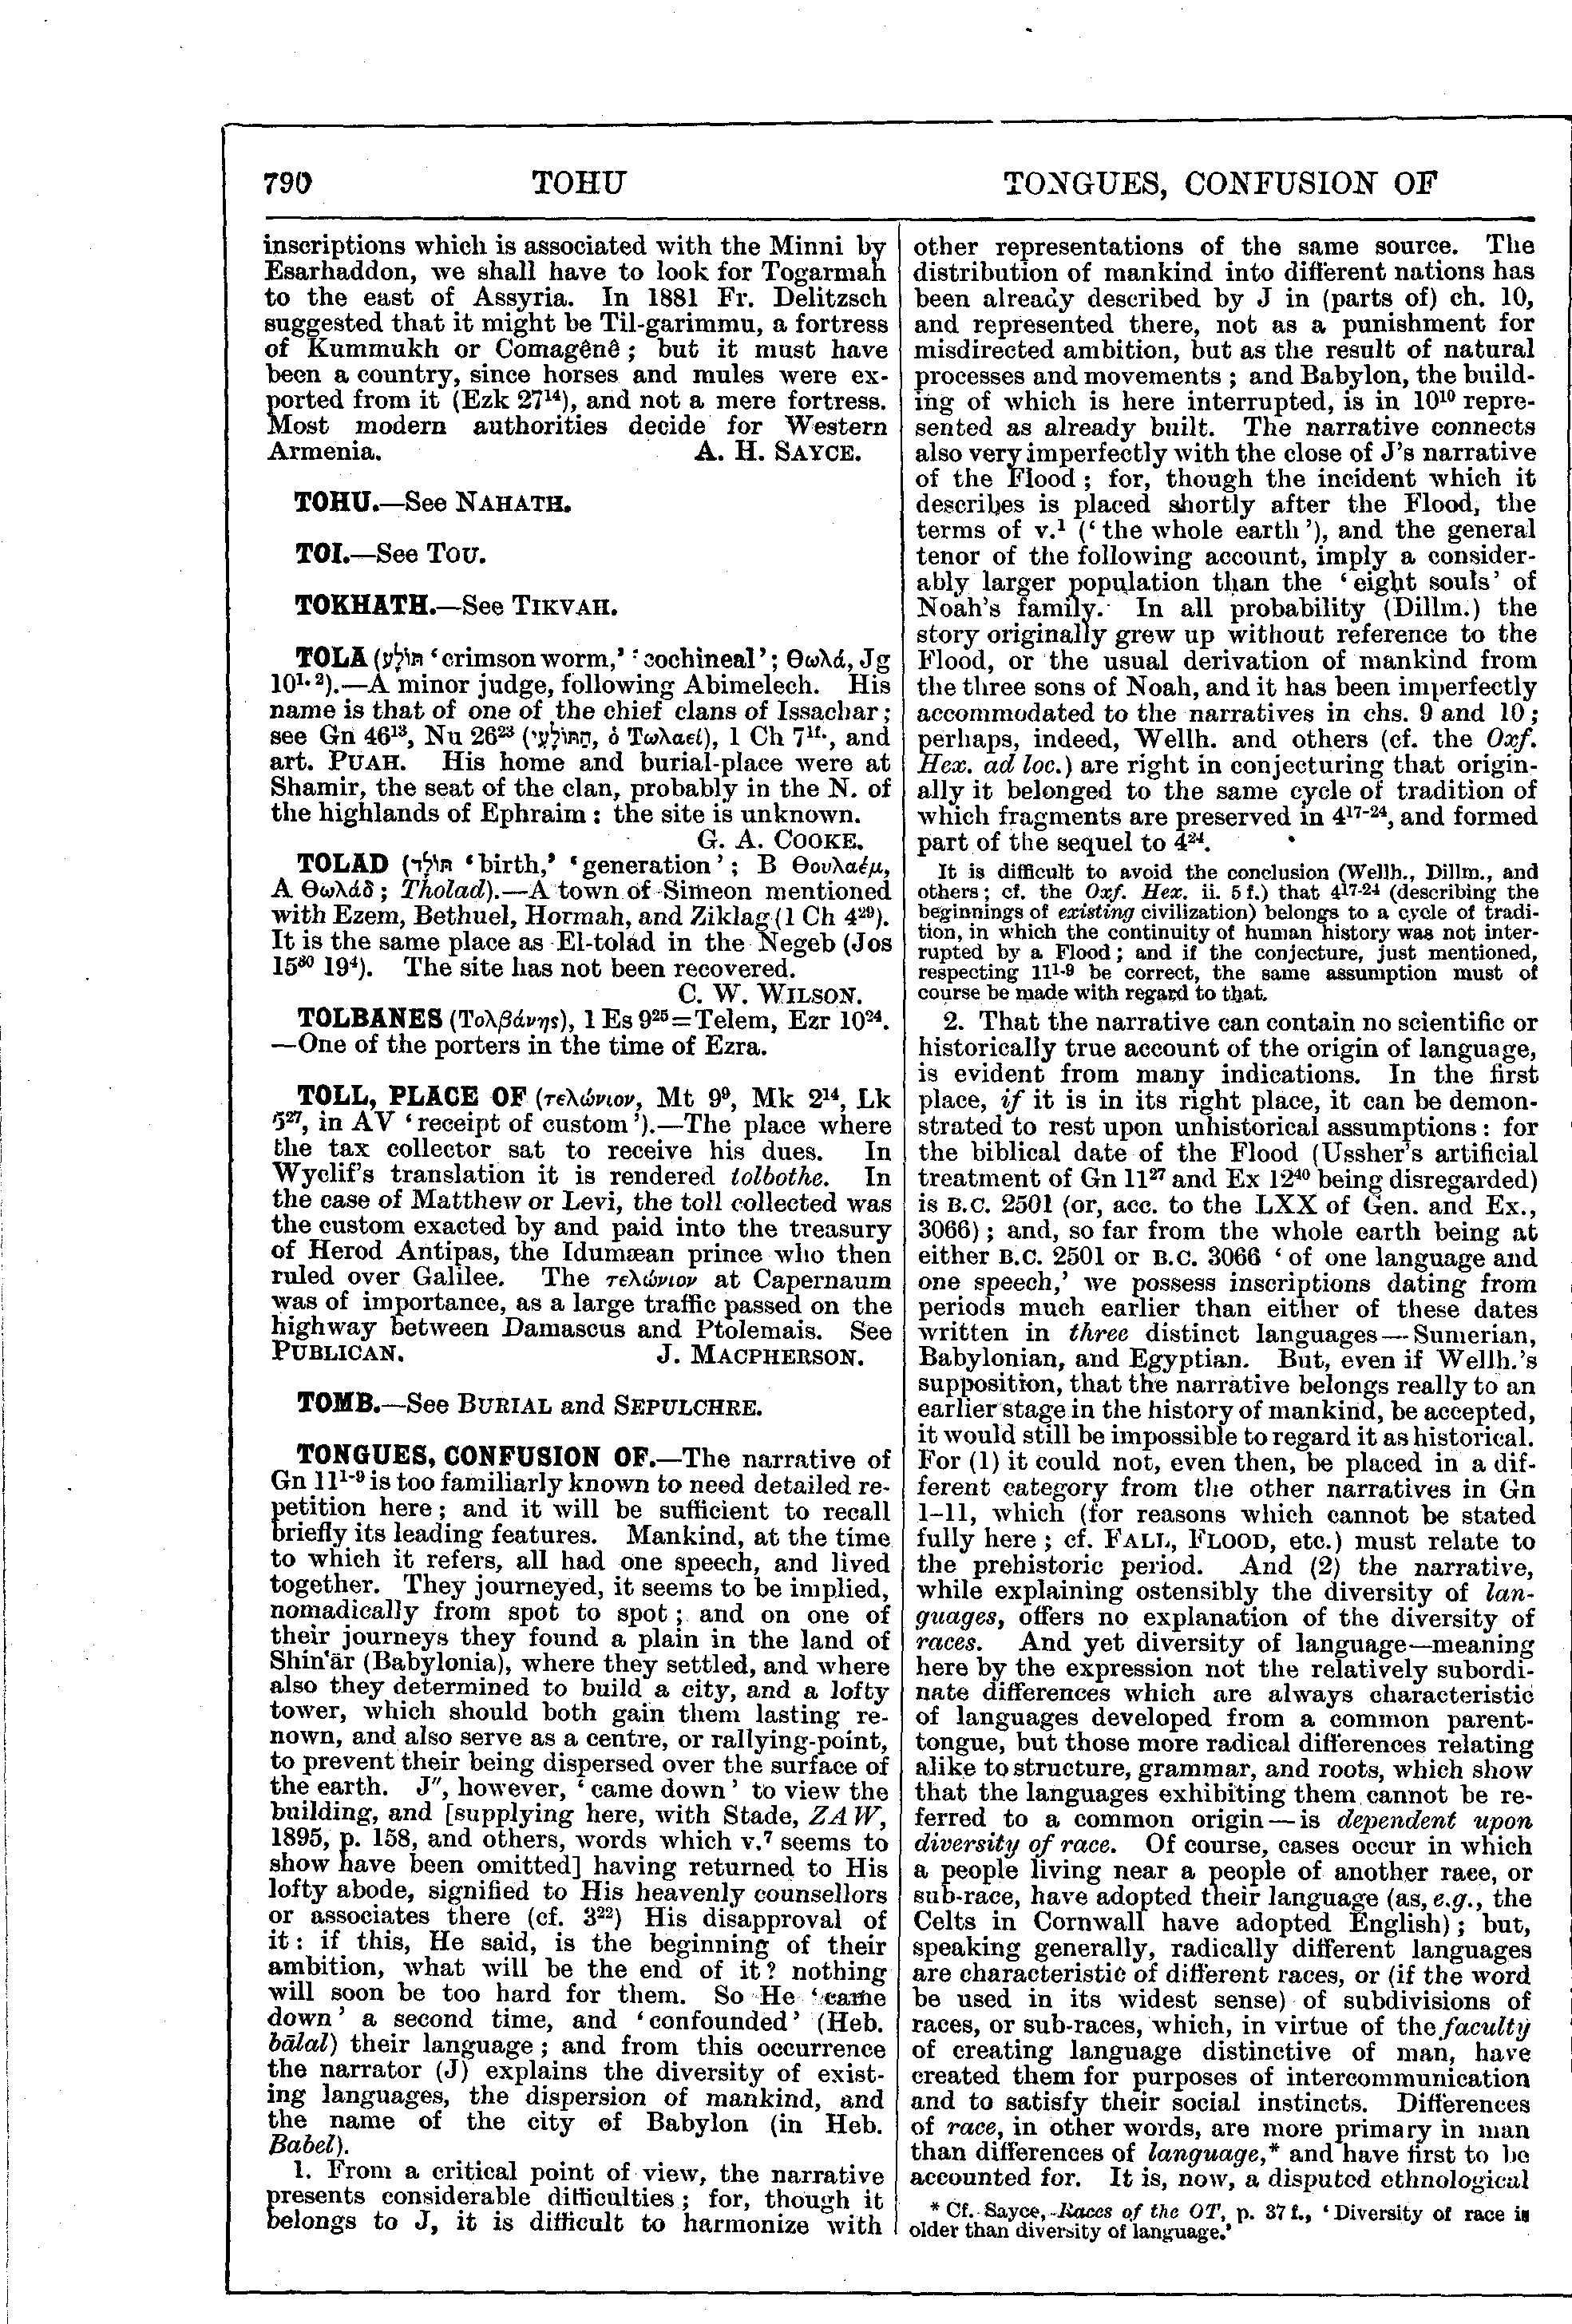 Image of page 790